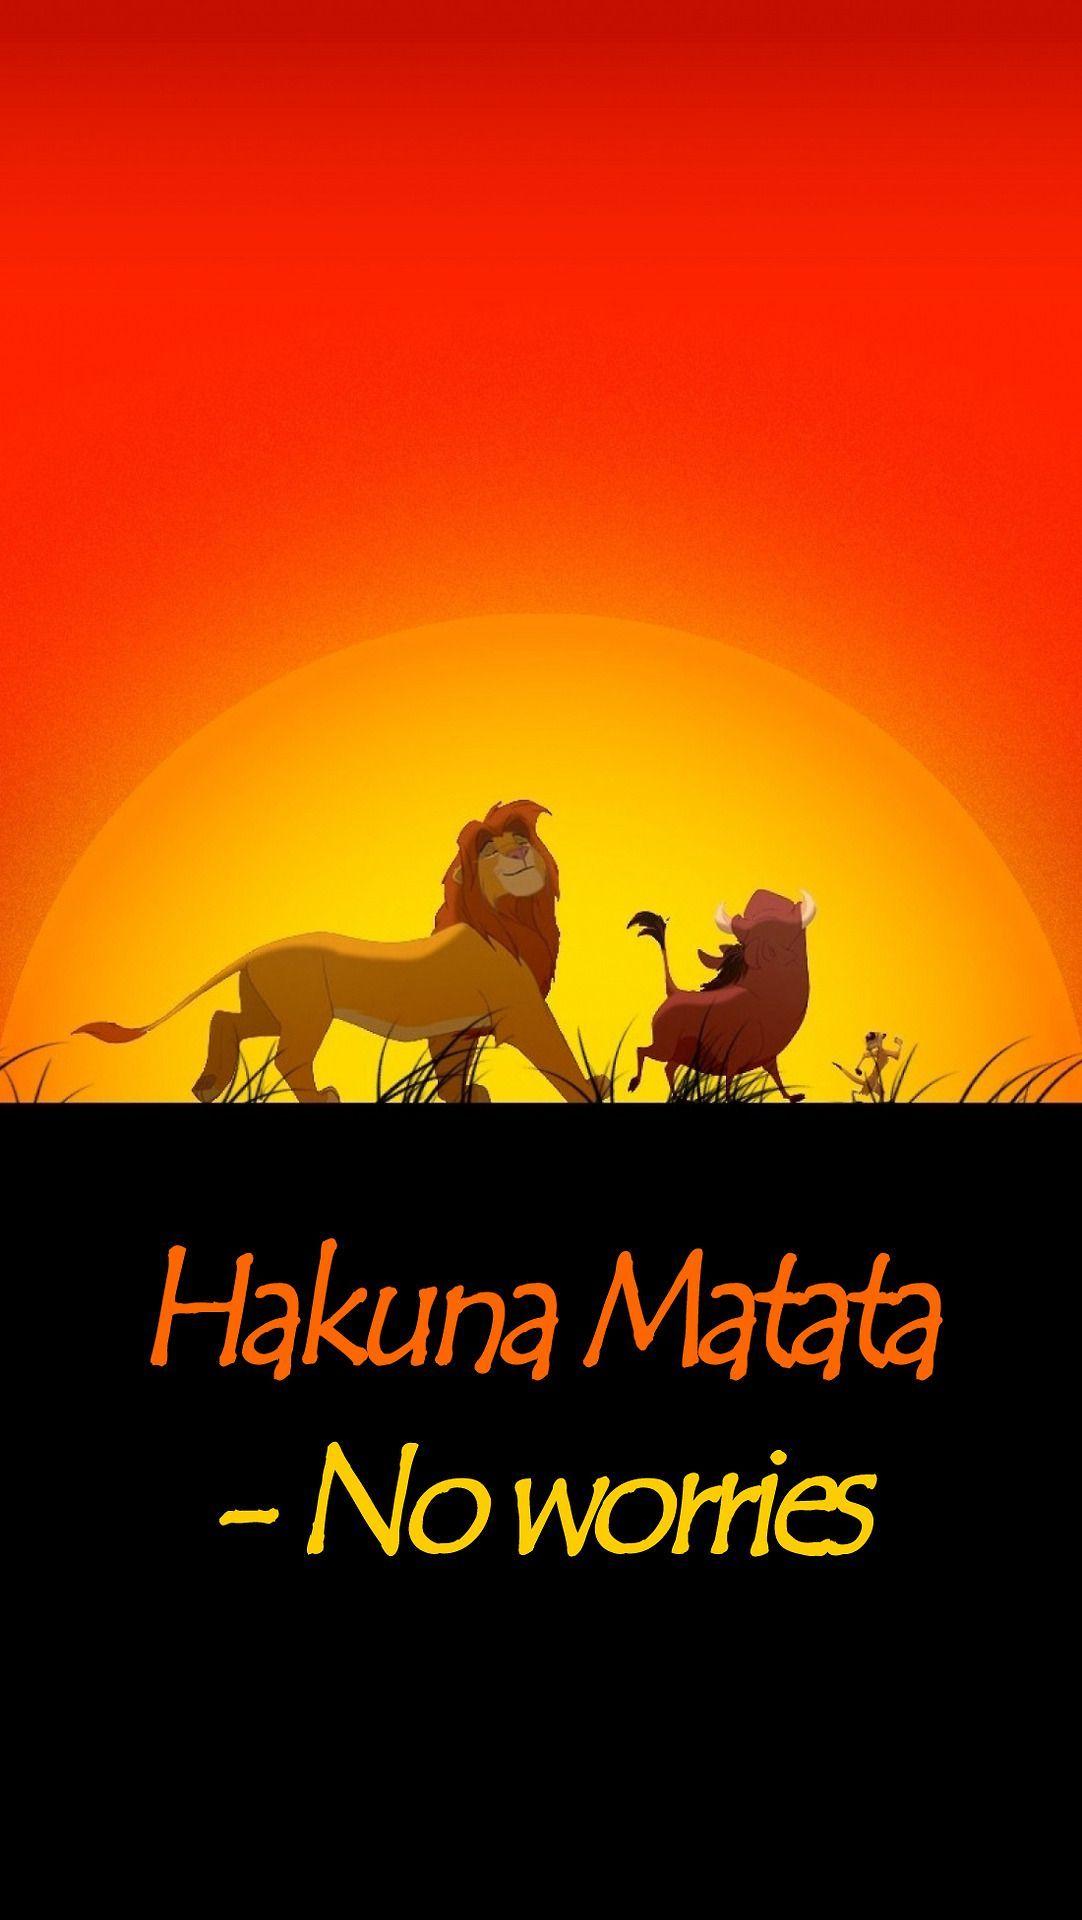 Lion King Quotes Wallpapers Top Free Lion King Quotes Backgrounds Wallpaperaccess